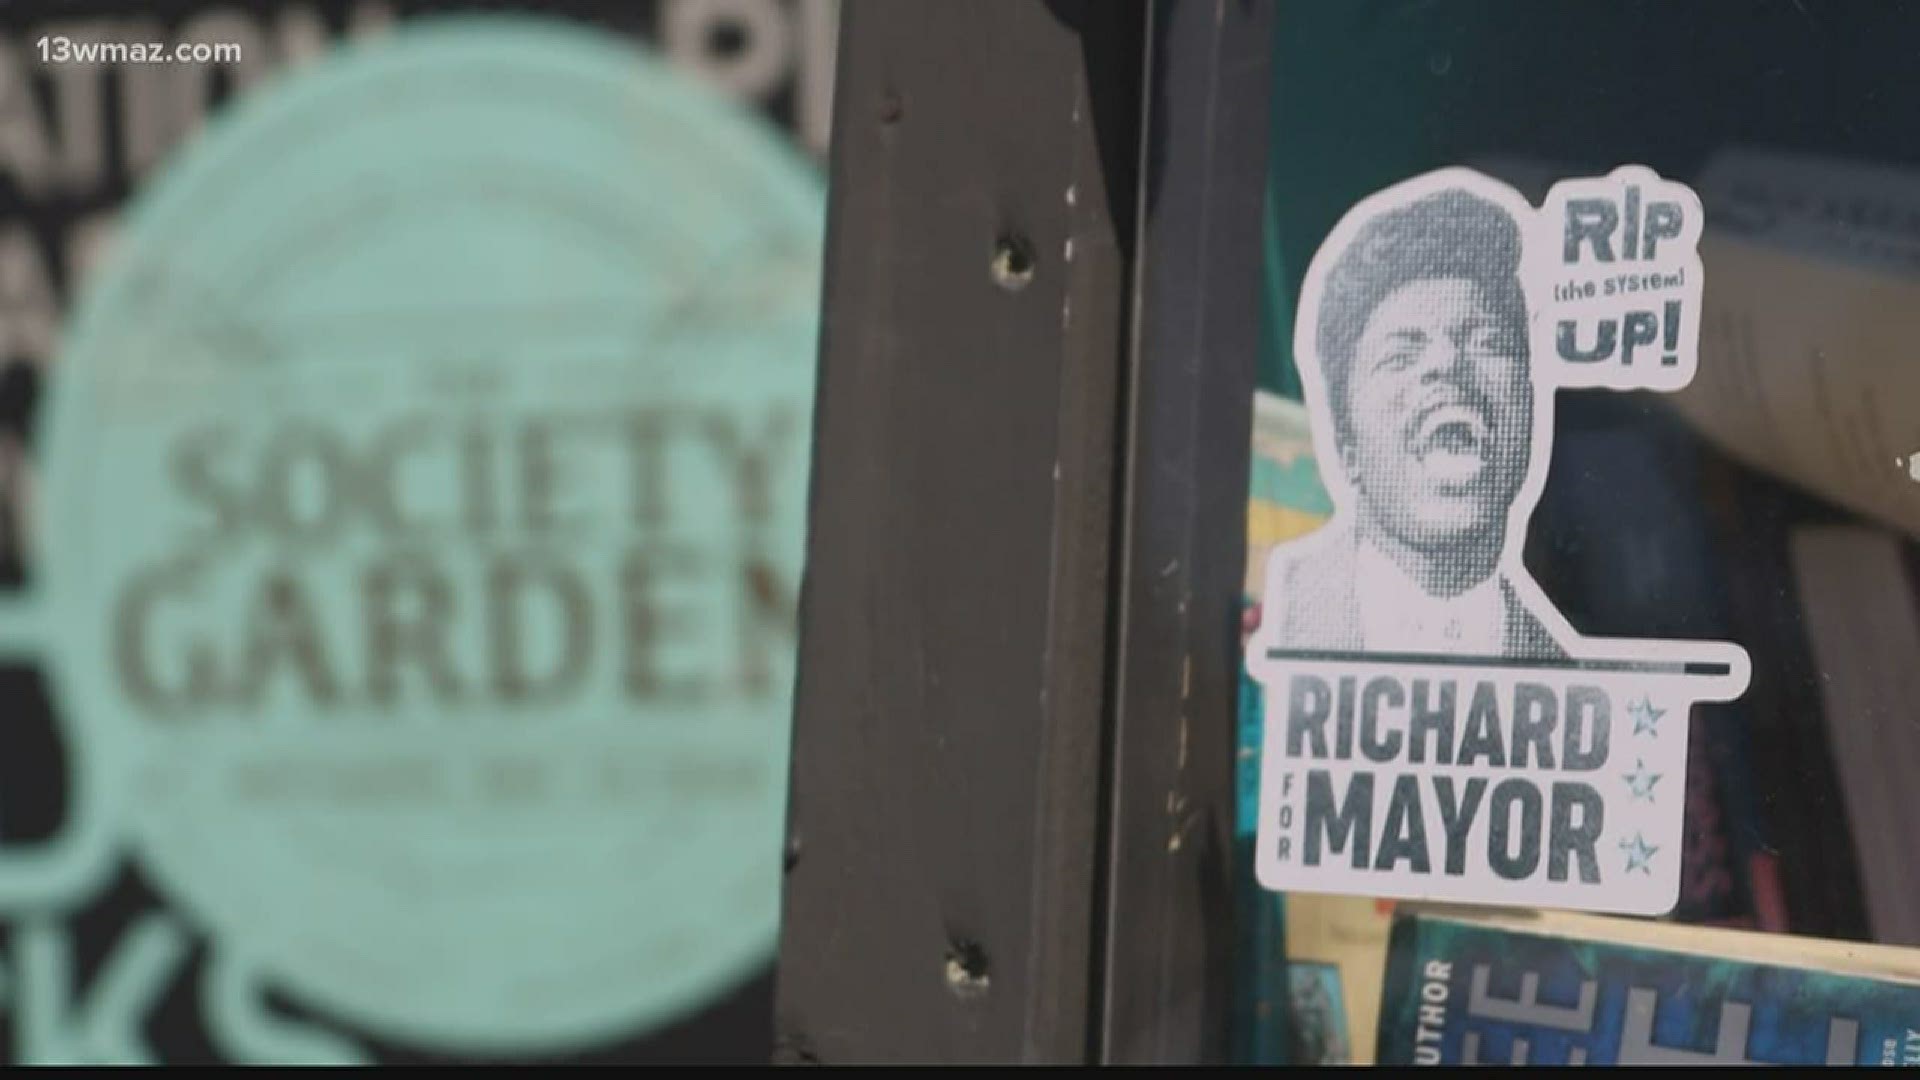 The Society Garden started a GoFundMe to raise money for a Little Richard mural. Hours later, they've already met the goal of $4,500.